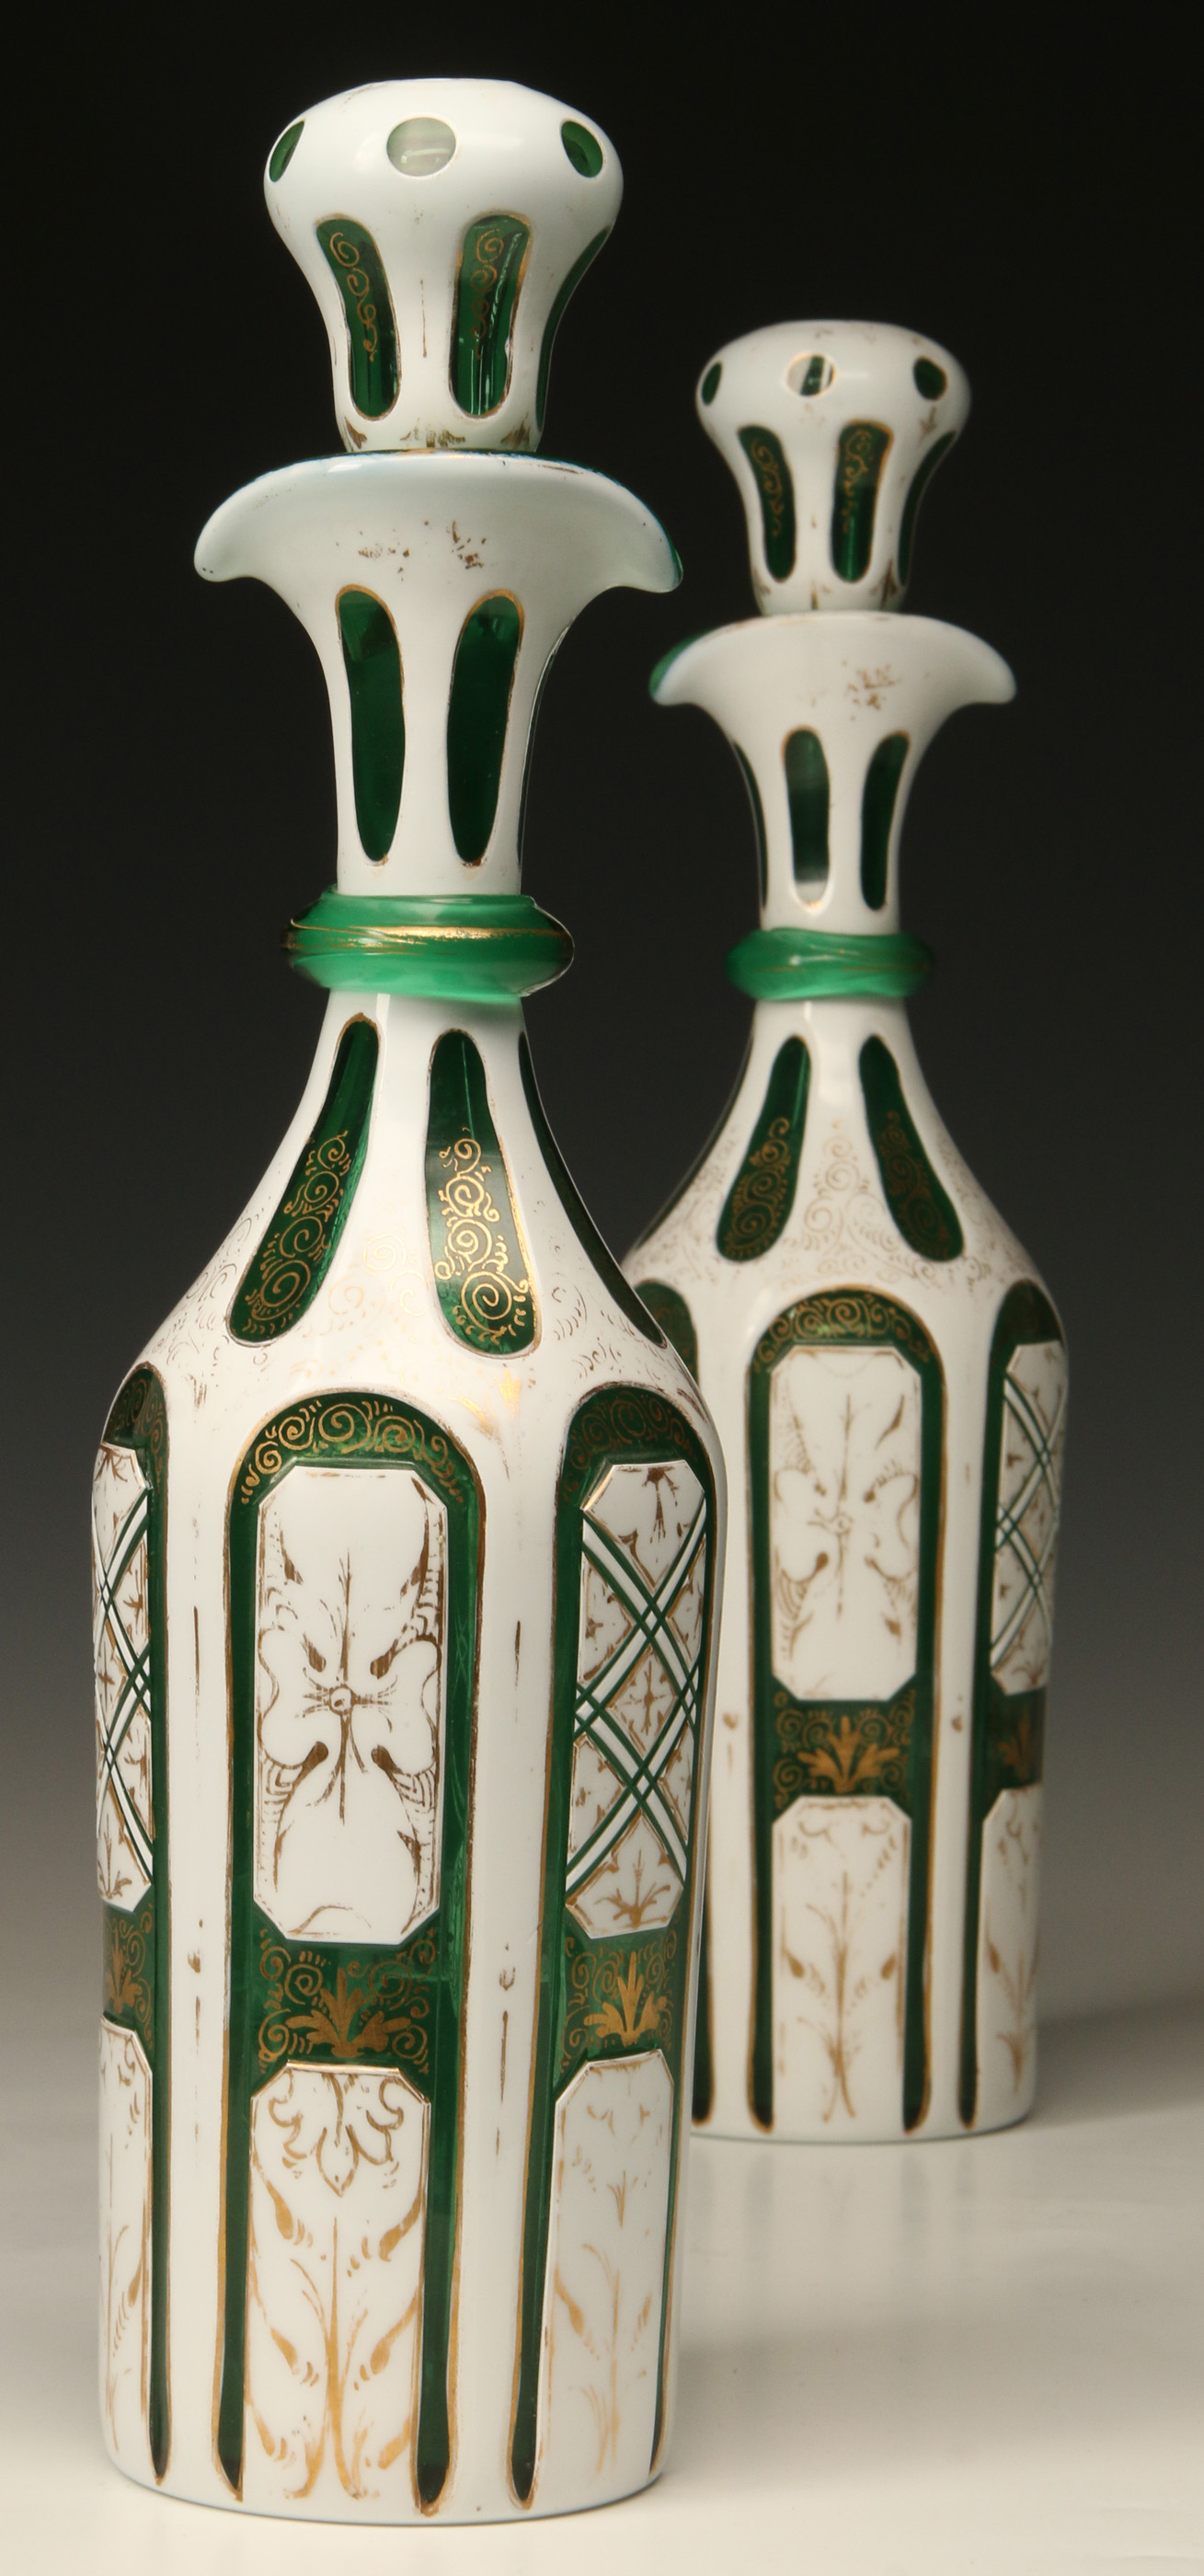 A PAIR OF 19TH C. BOHEMIAN CASED GLASS DECANTERS